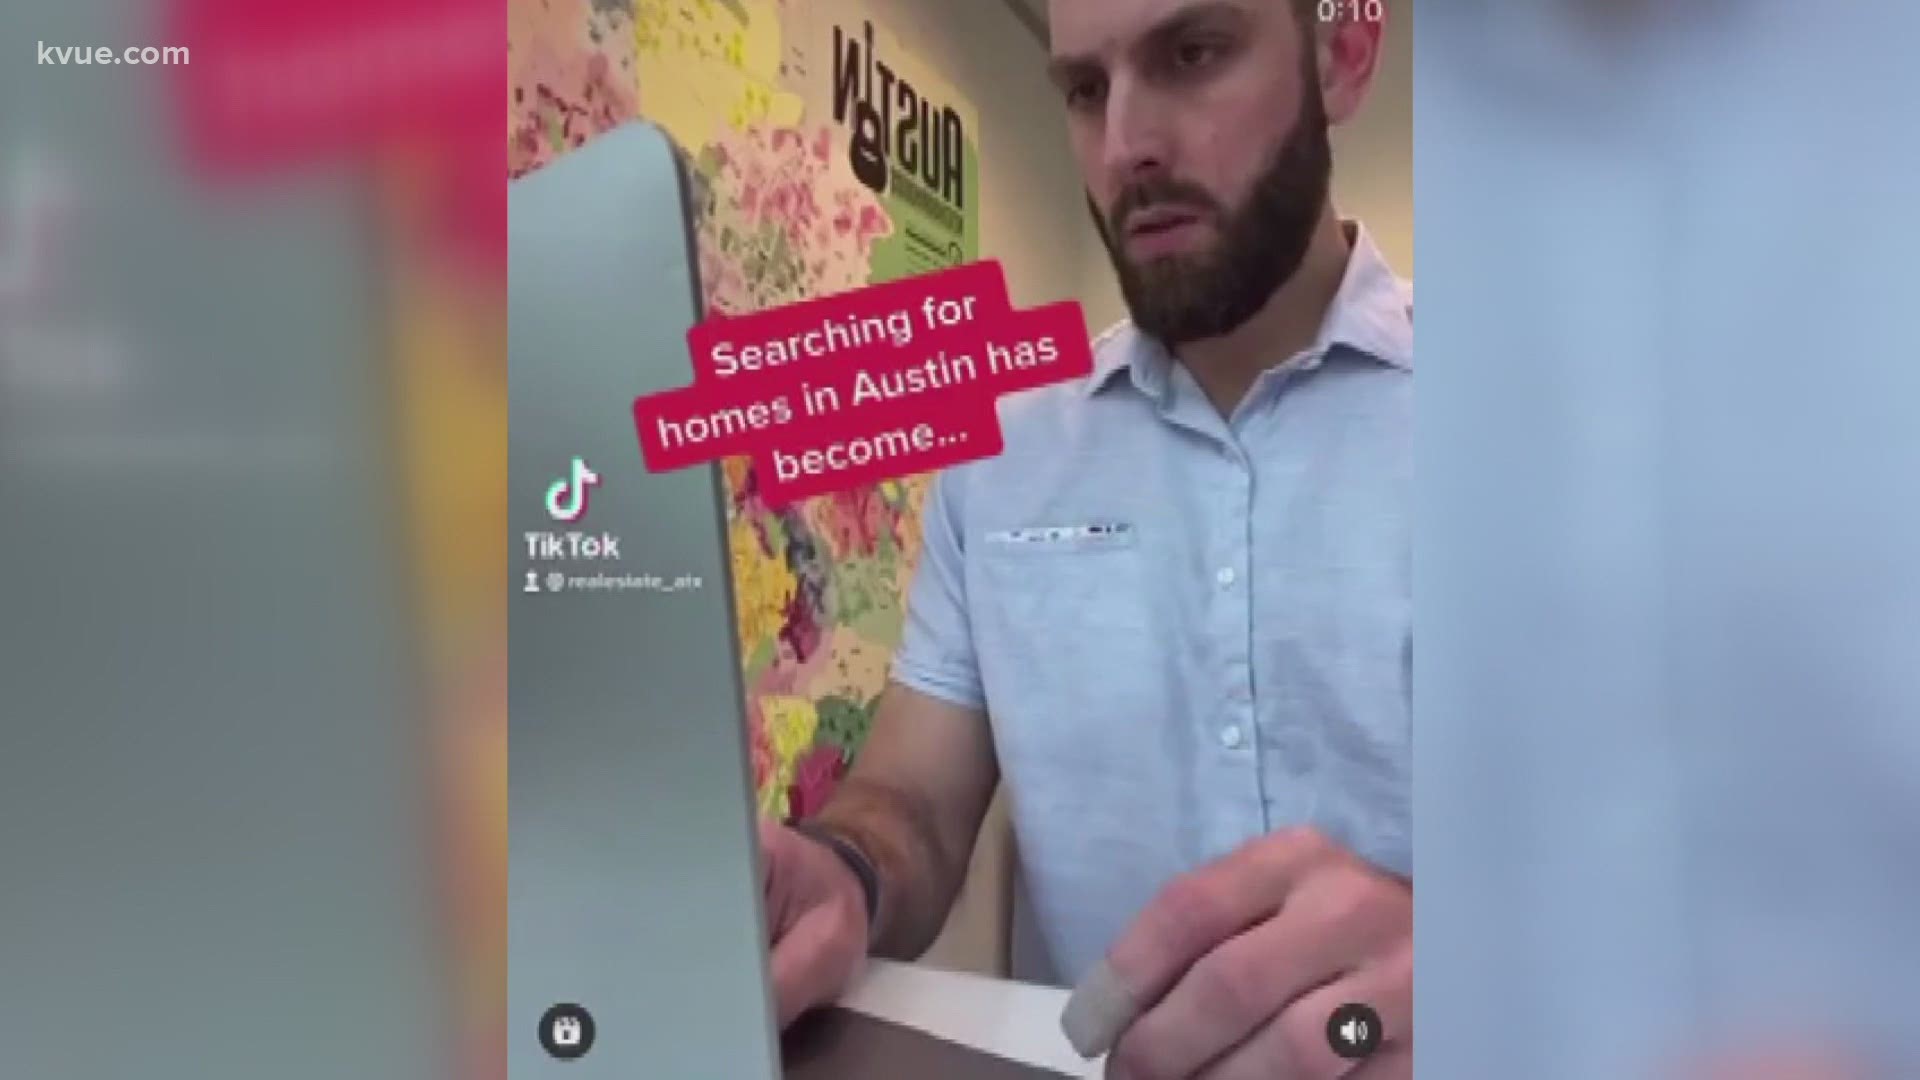 While the Austin-area real estate market can certainly be frustrating, some local real estate agents are having a little fun on TikTok.